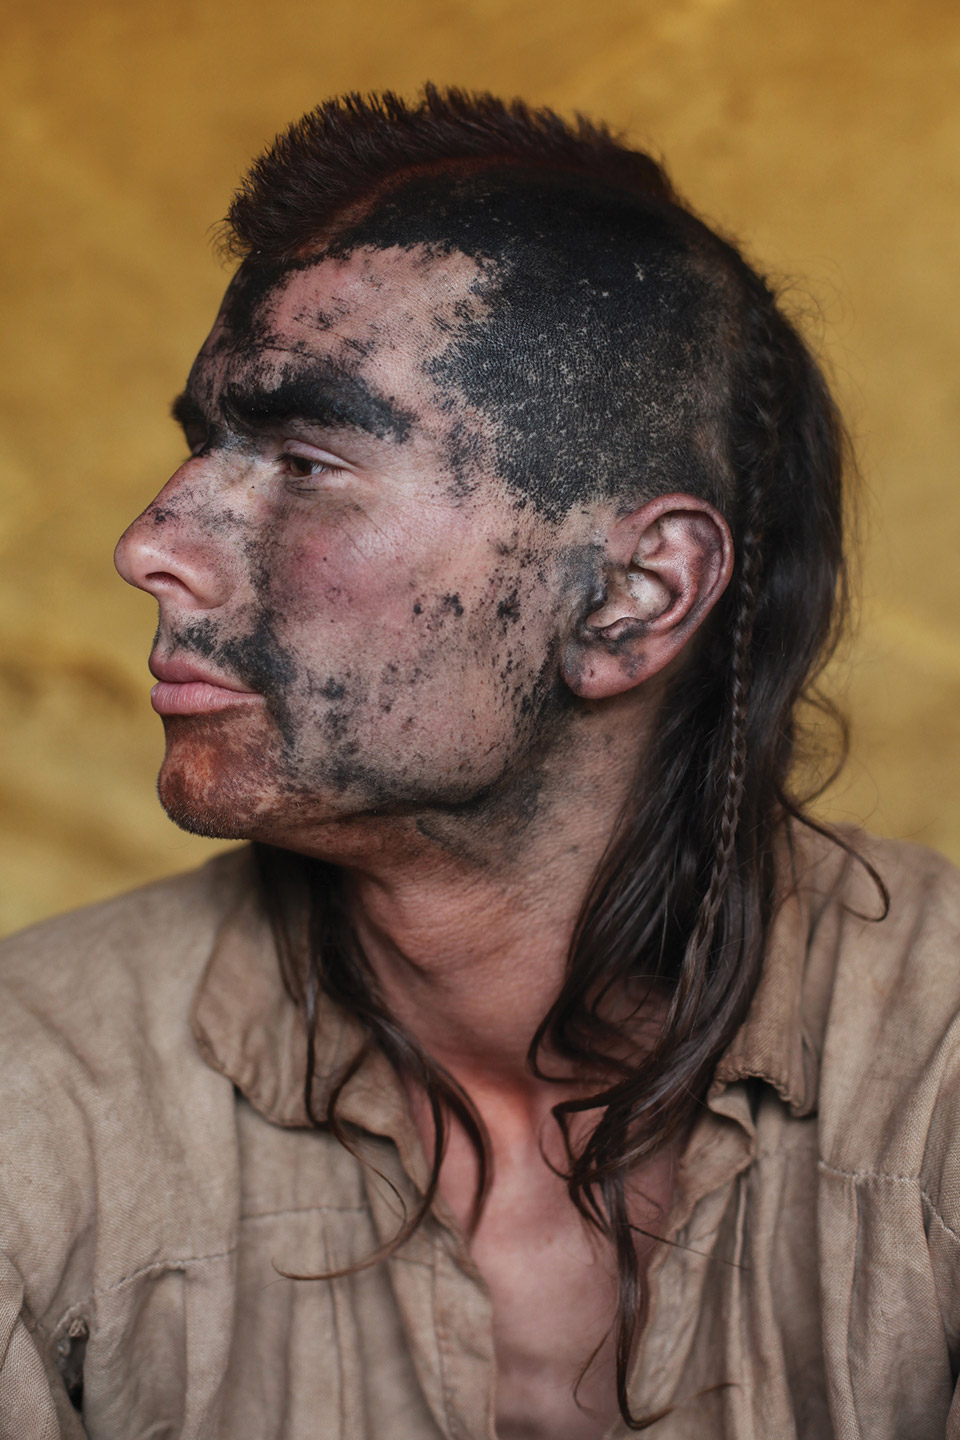 Man dressed as Native American with mohawk and braid.